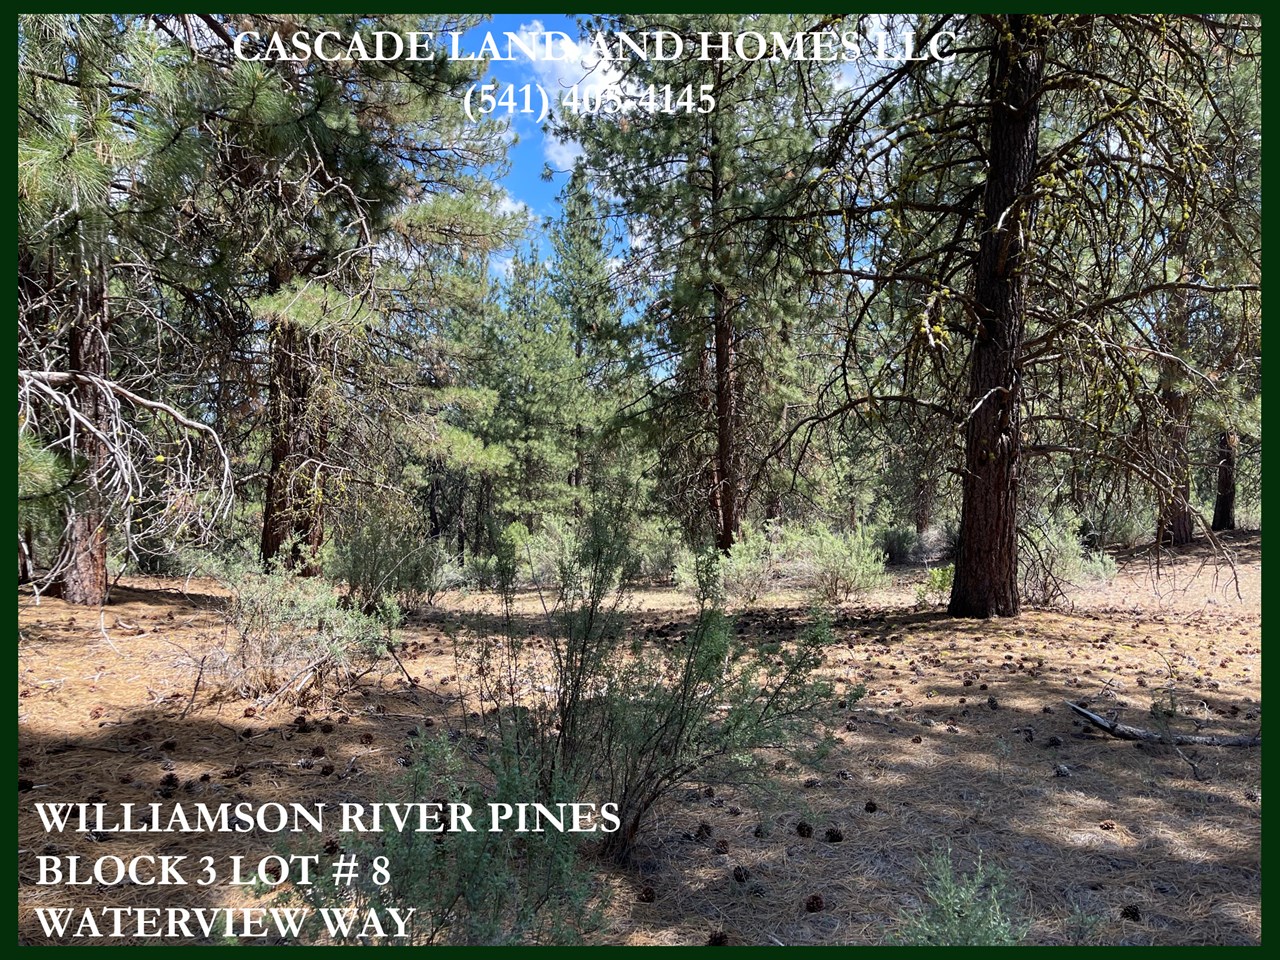 power and phone are available, and the property would need a well and septic. even though standing at this place, you feel like you are out in the wilderness, it sits at the north end of the town of chiloquin, and klamath falls is just a short drive south on hwy 97.